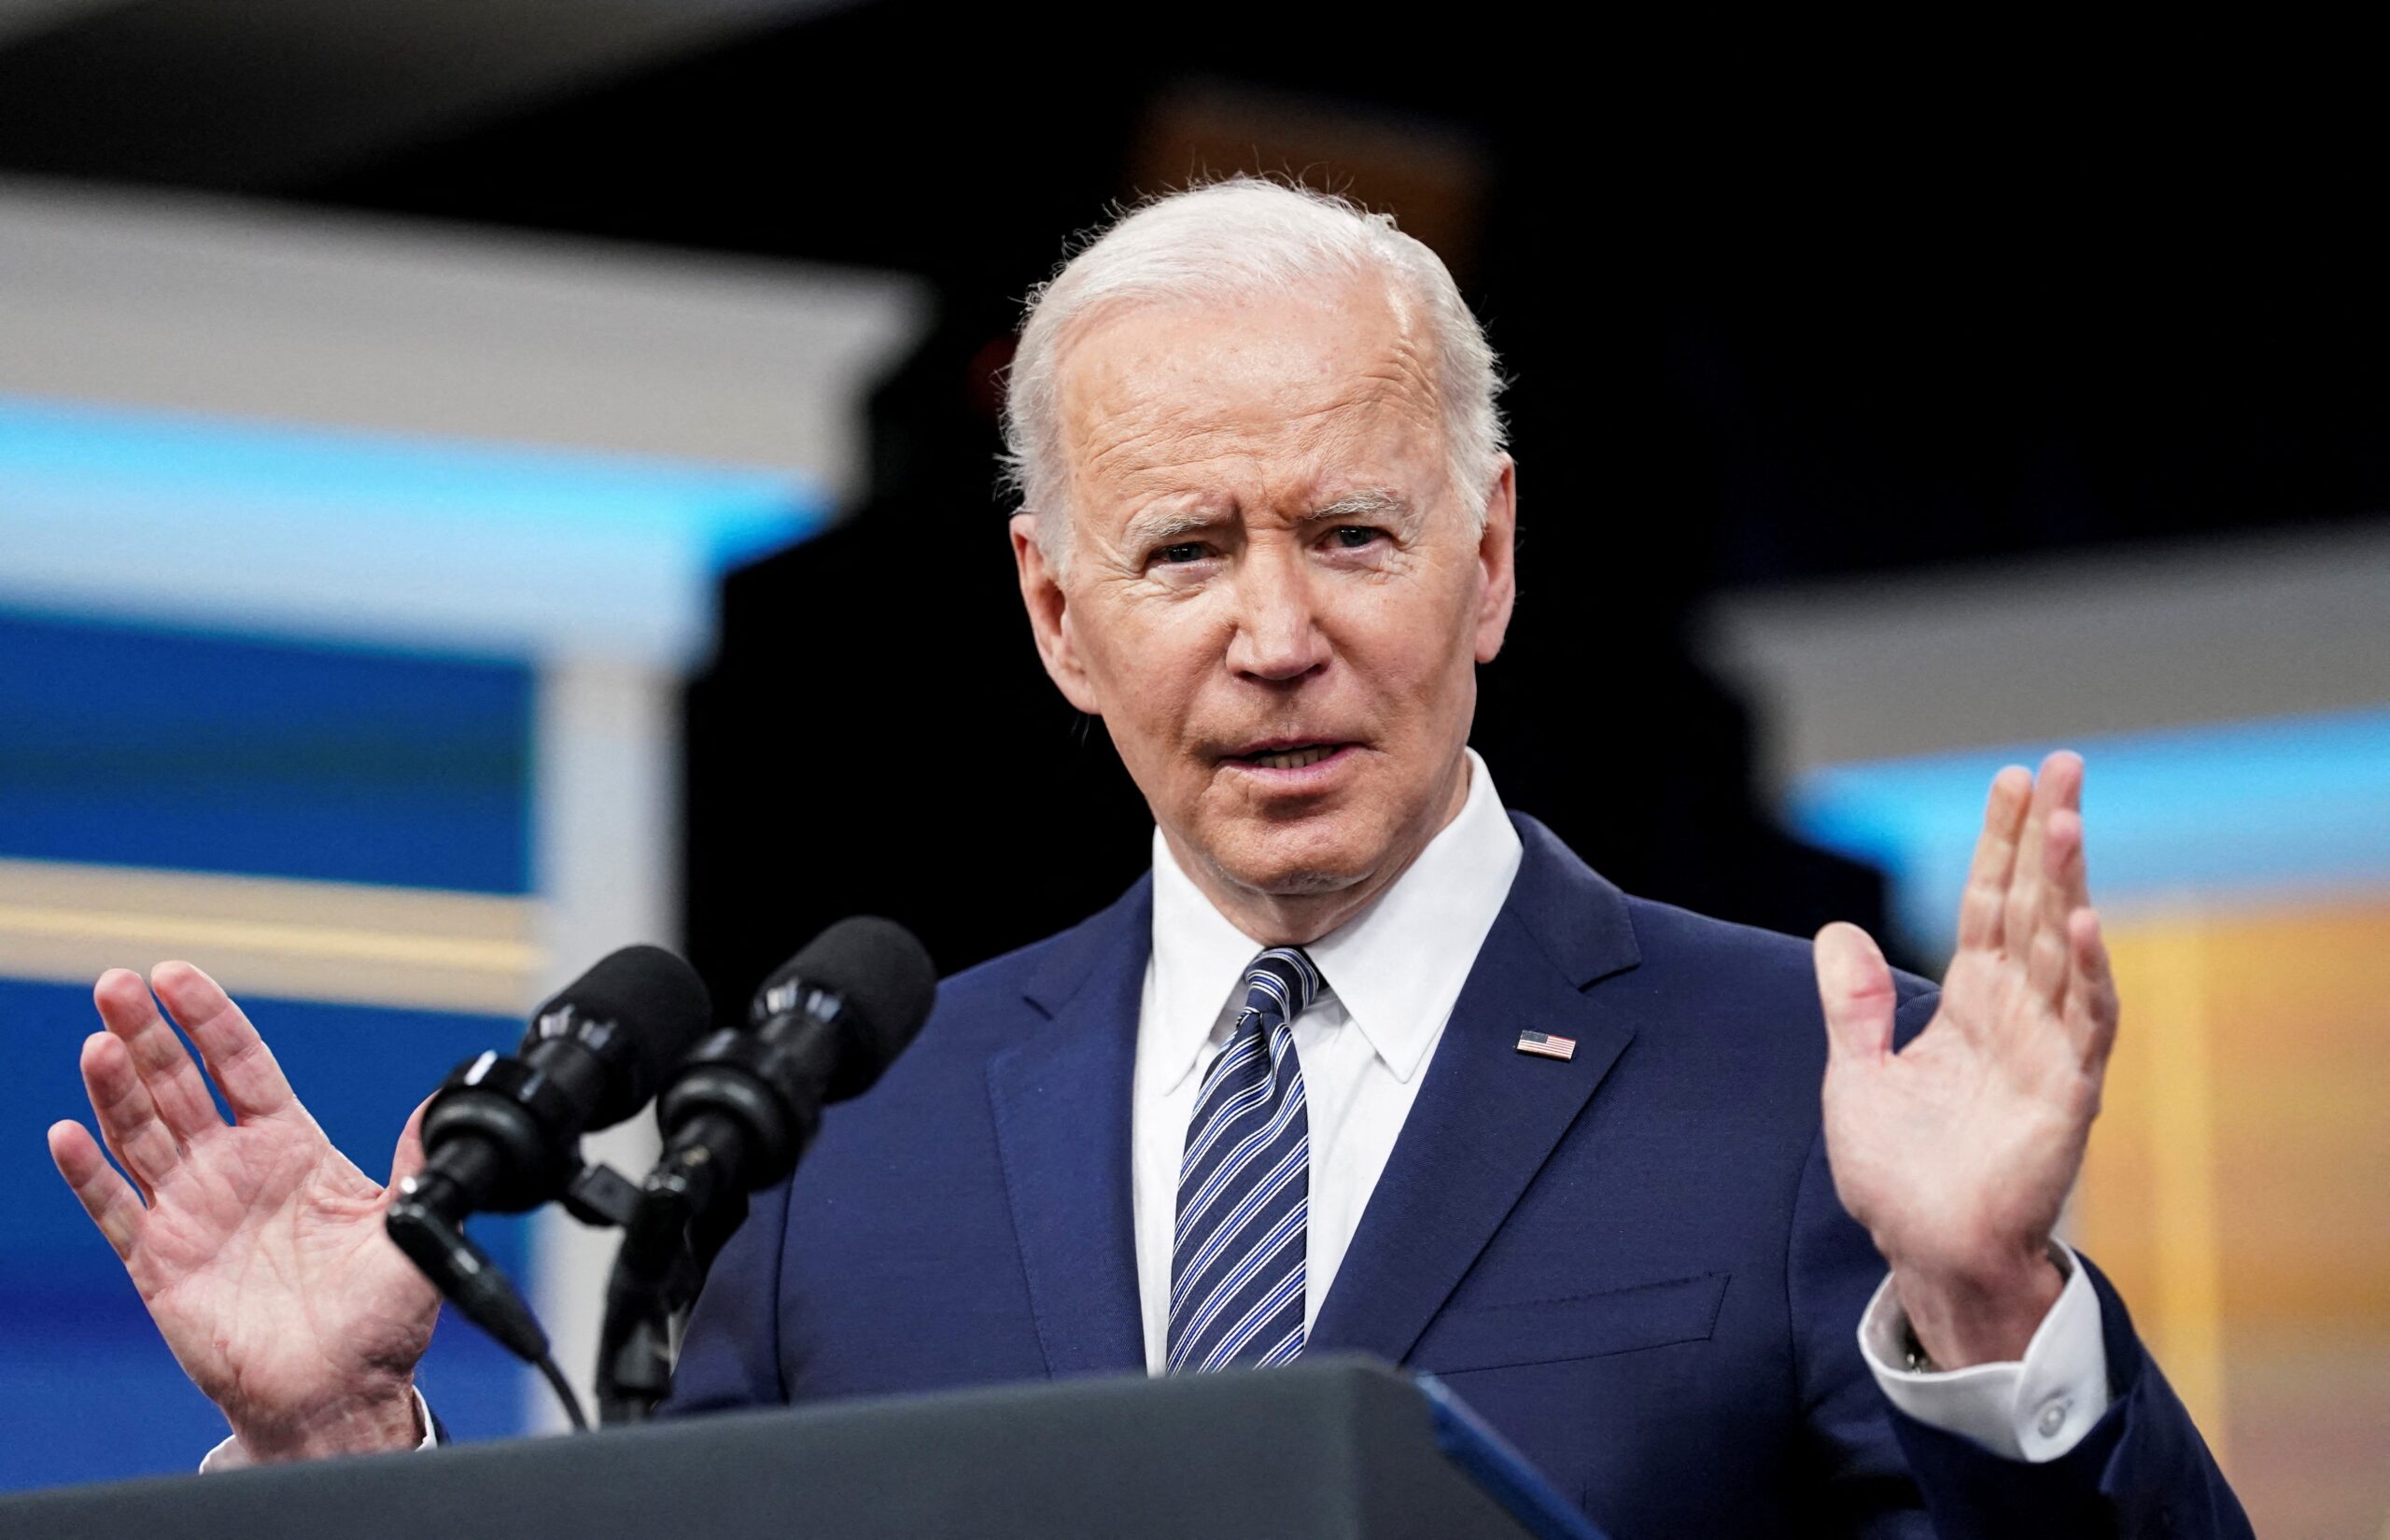 Internet erupts after Biden's team wards off press as he takes questions at campaign stop: 'This is bad'